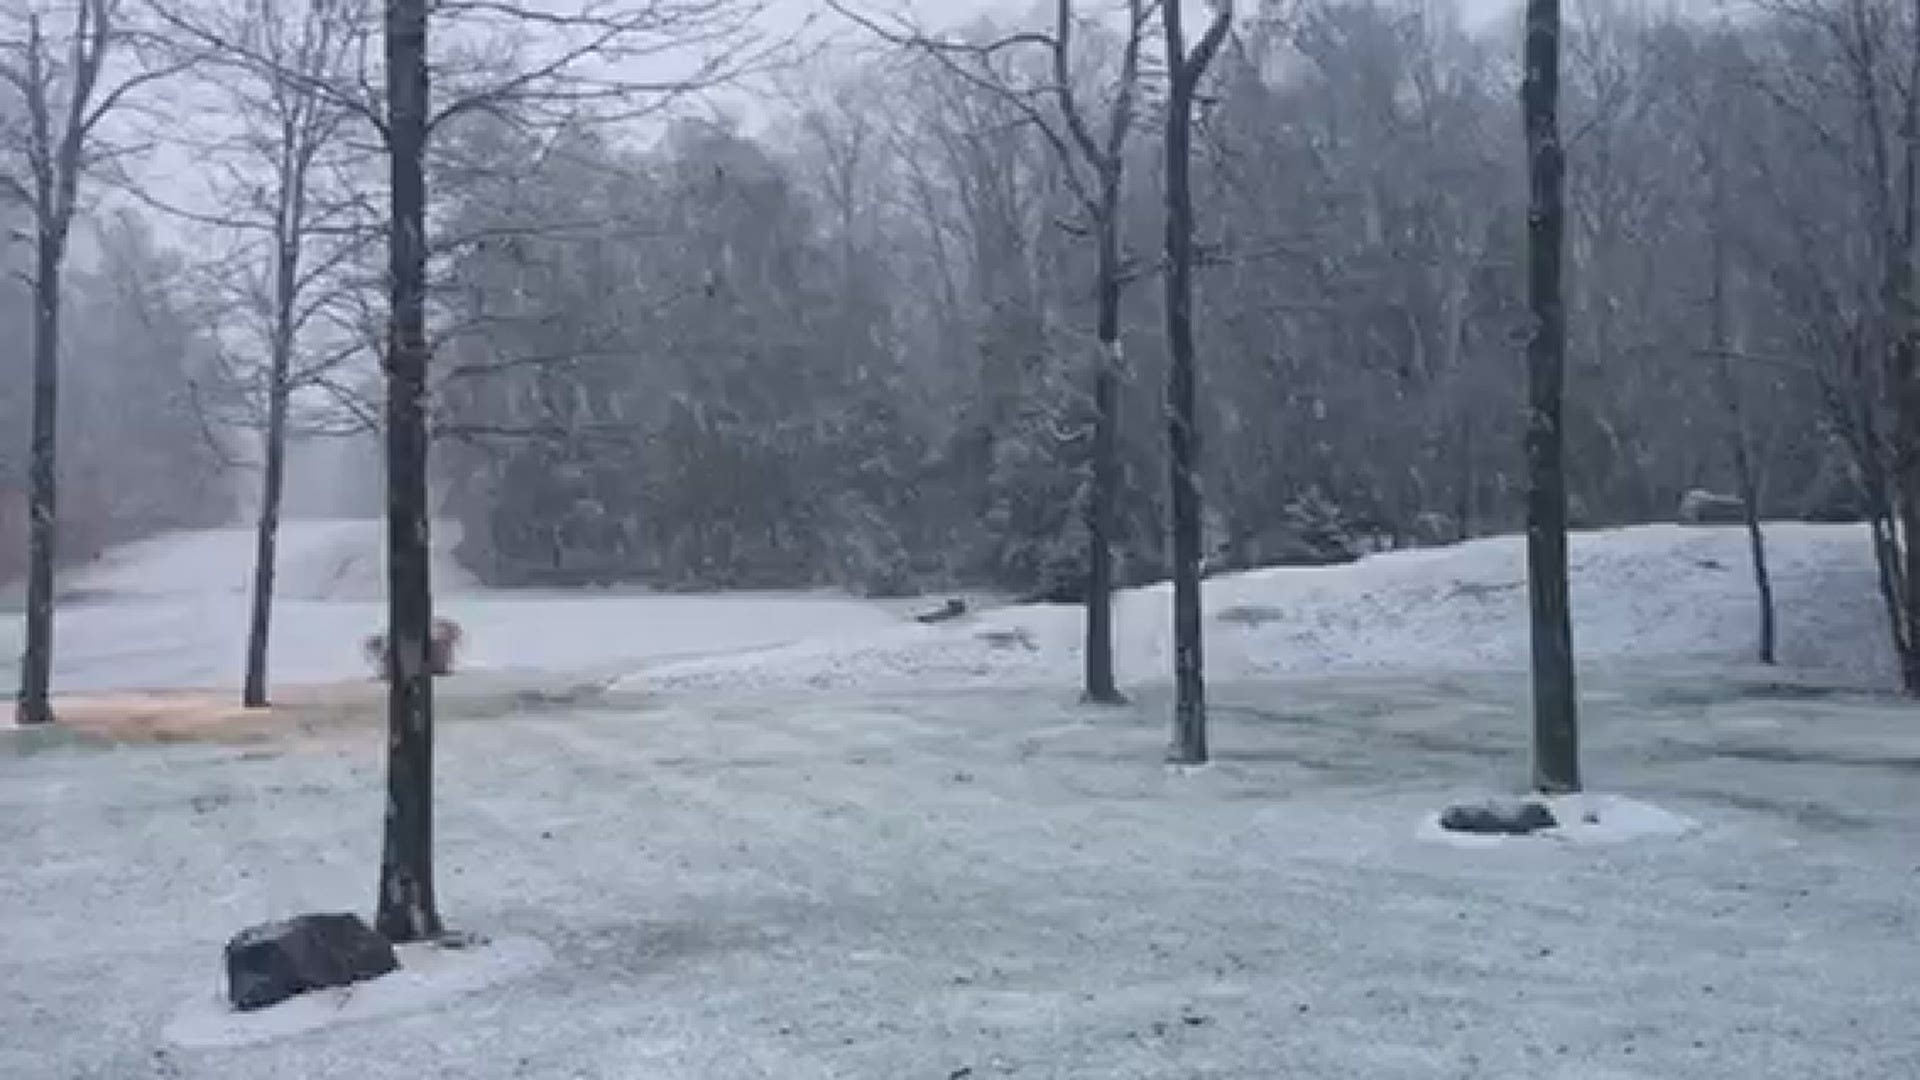 FOX61 viewers Pete & Paulina Losey shared this video of snow Saturday morning.